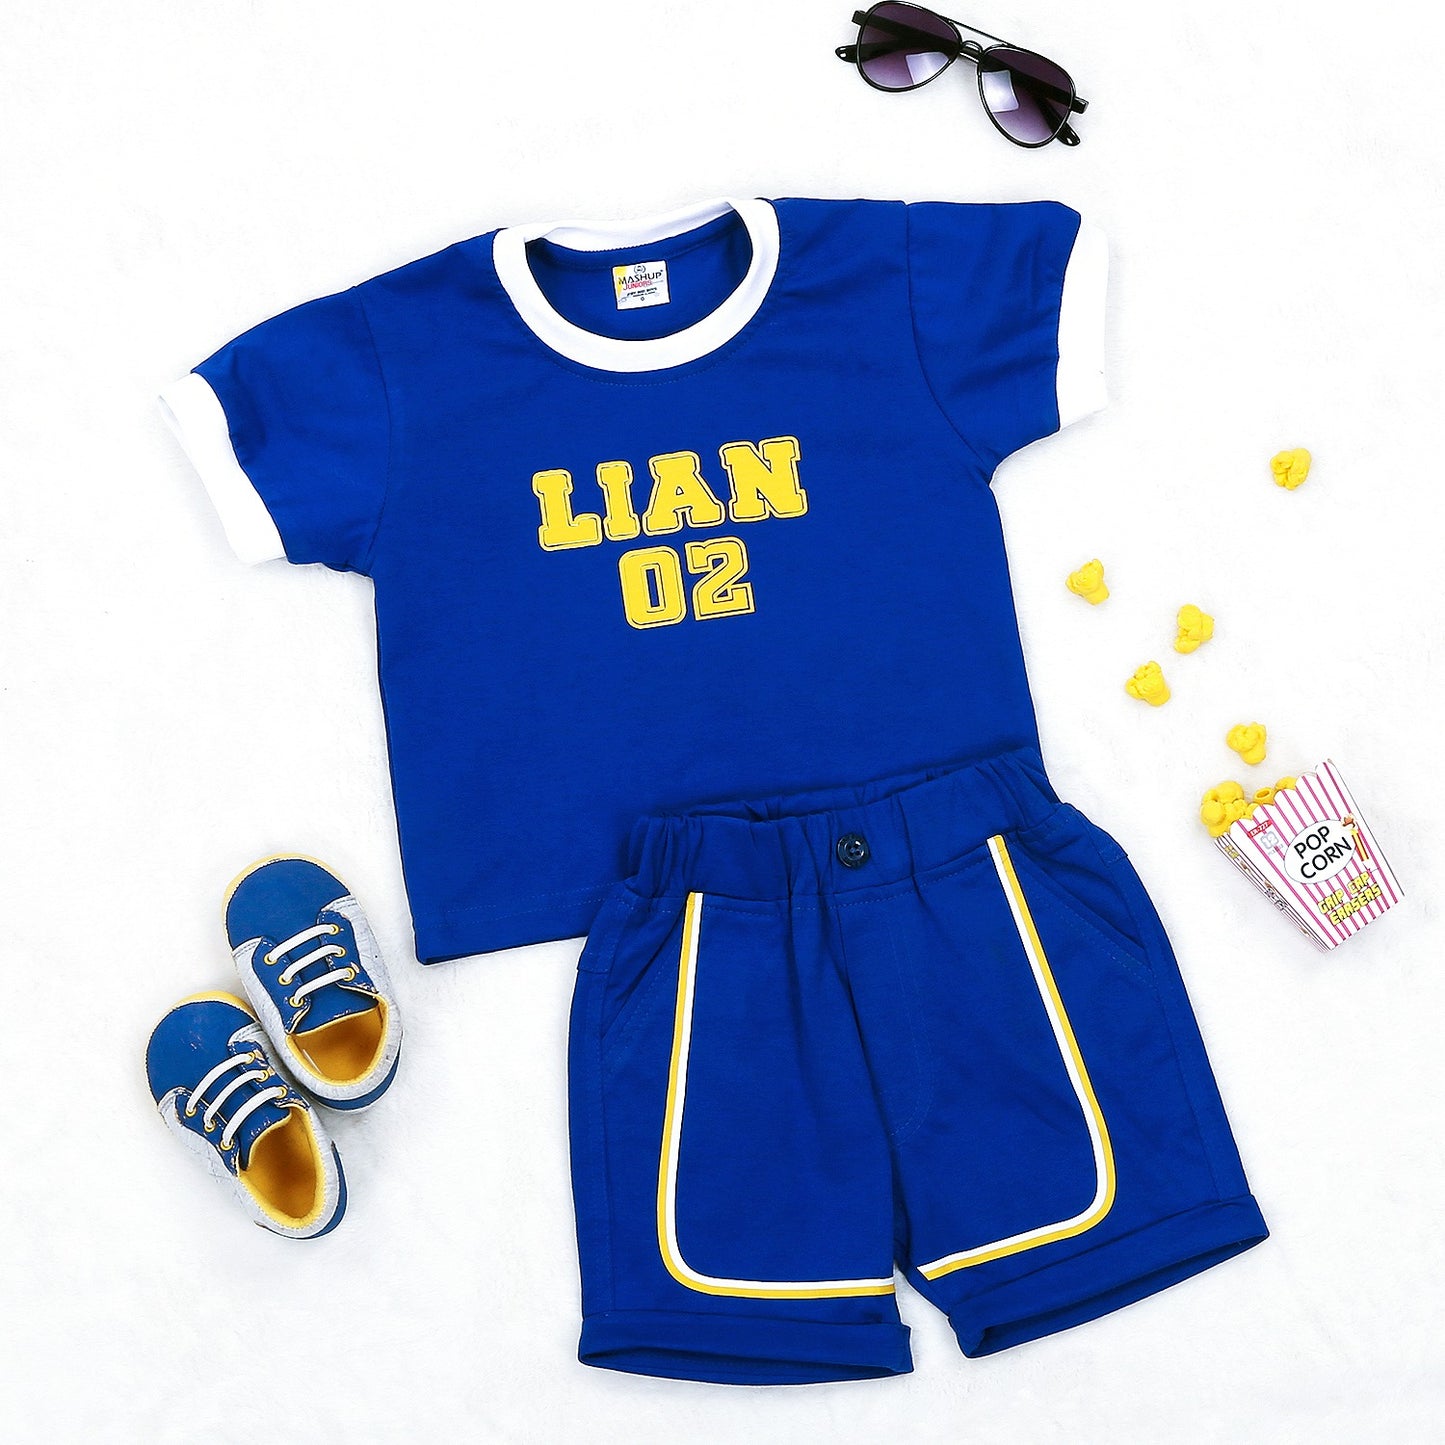 "Personalized Co-ord set/Sports Set (Relaxed Fit)"